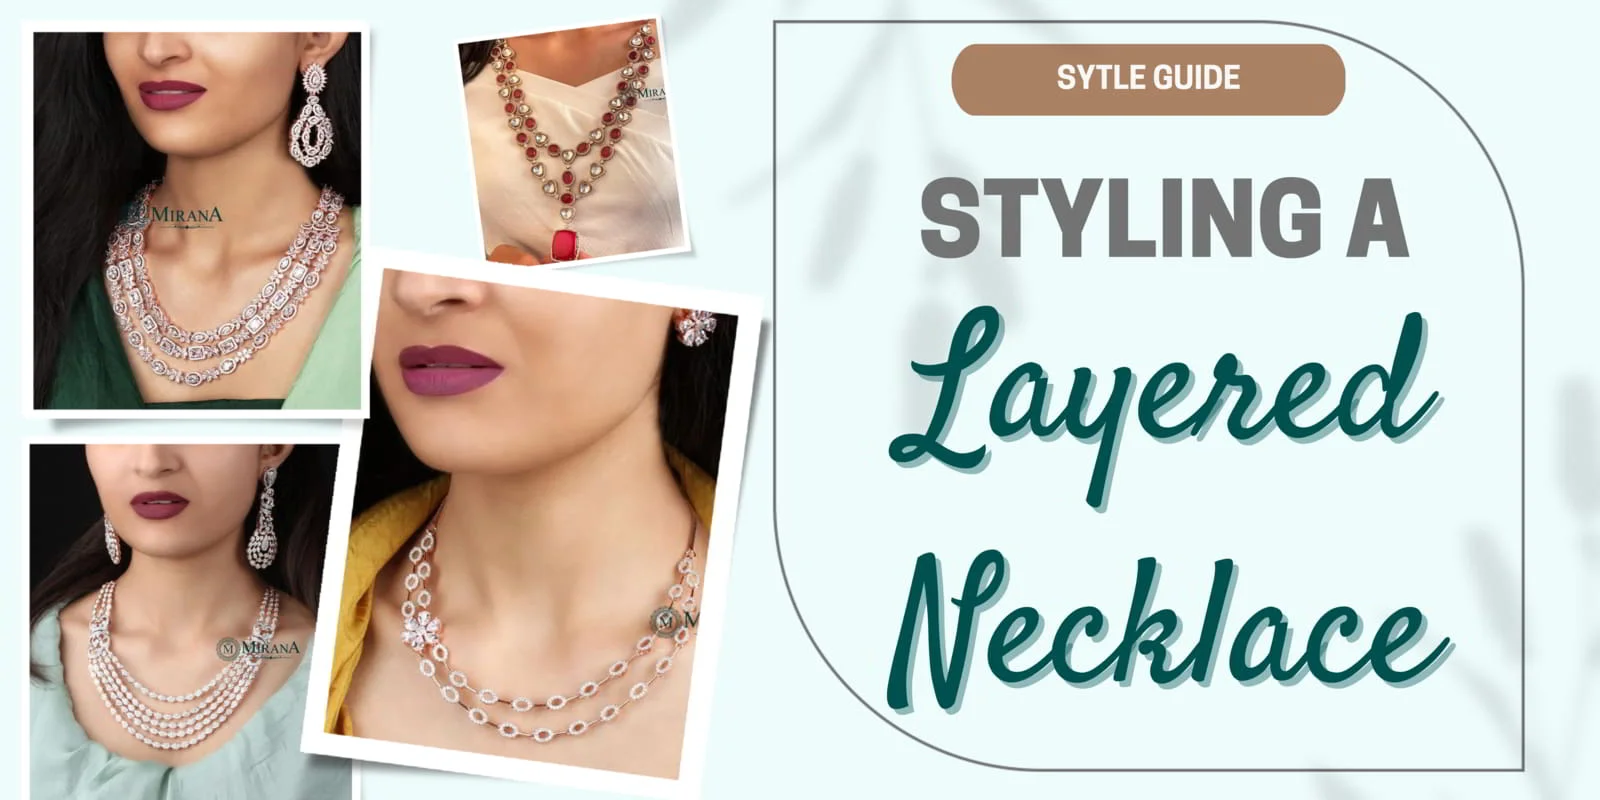 Guide to Style A Layered Necklace